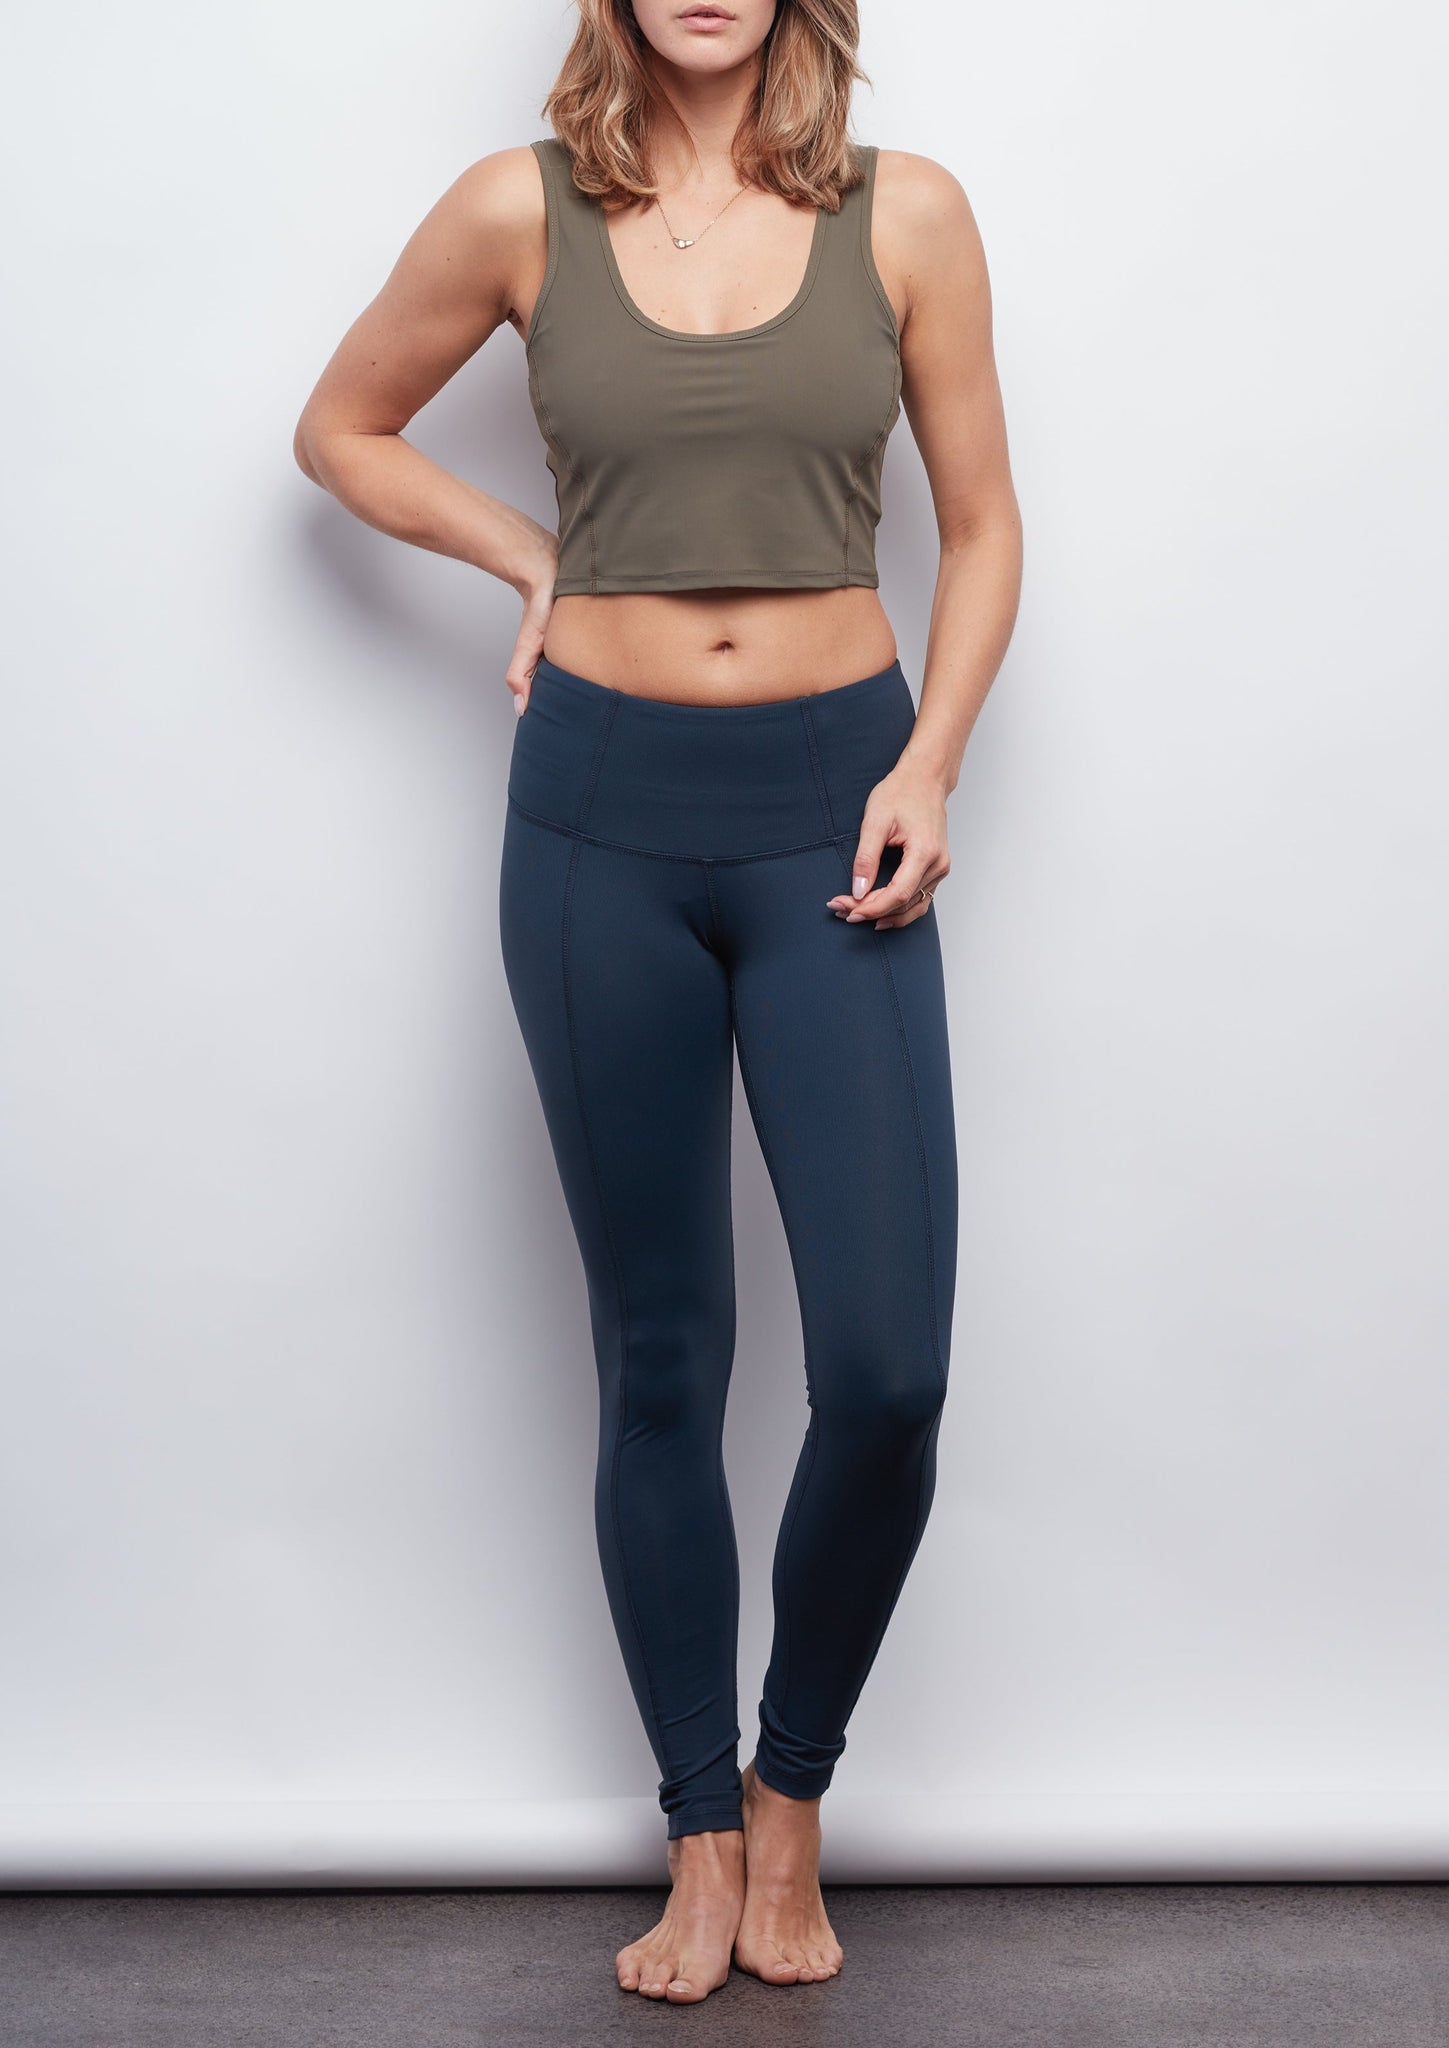 Haven Collective Leggings - Super Soft and Eco-Sustainable